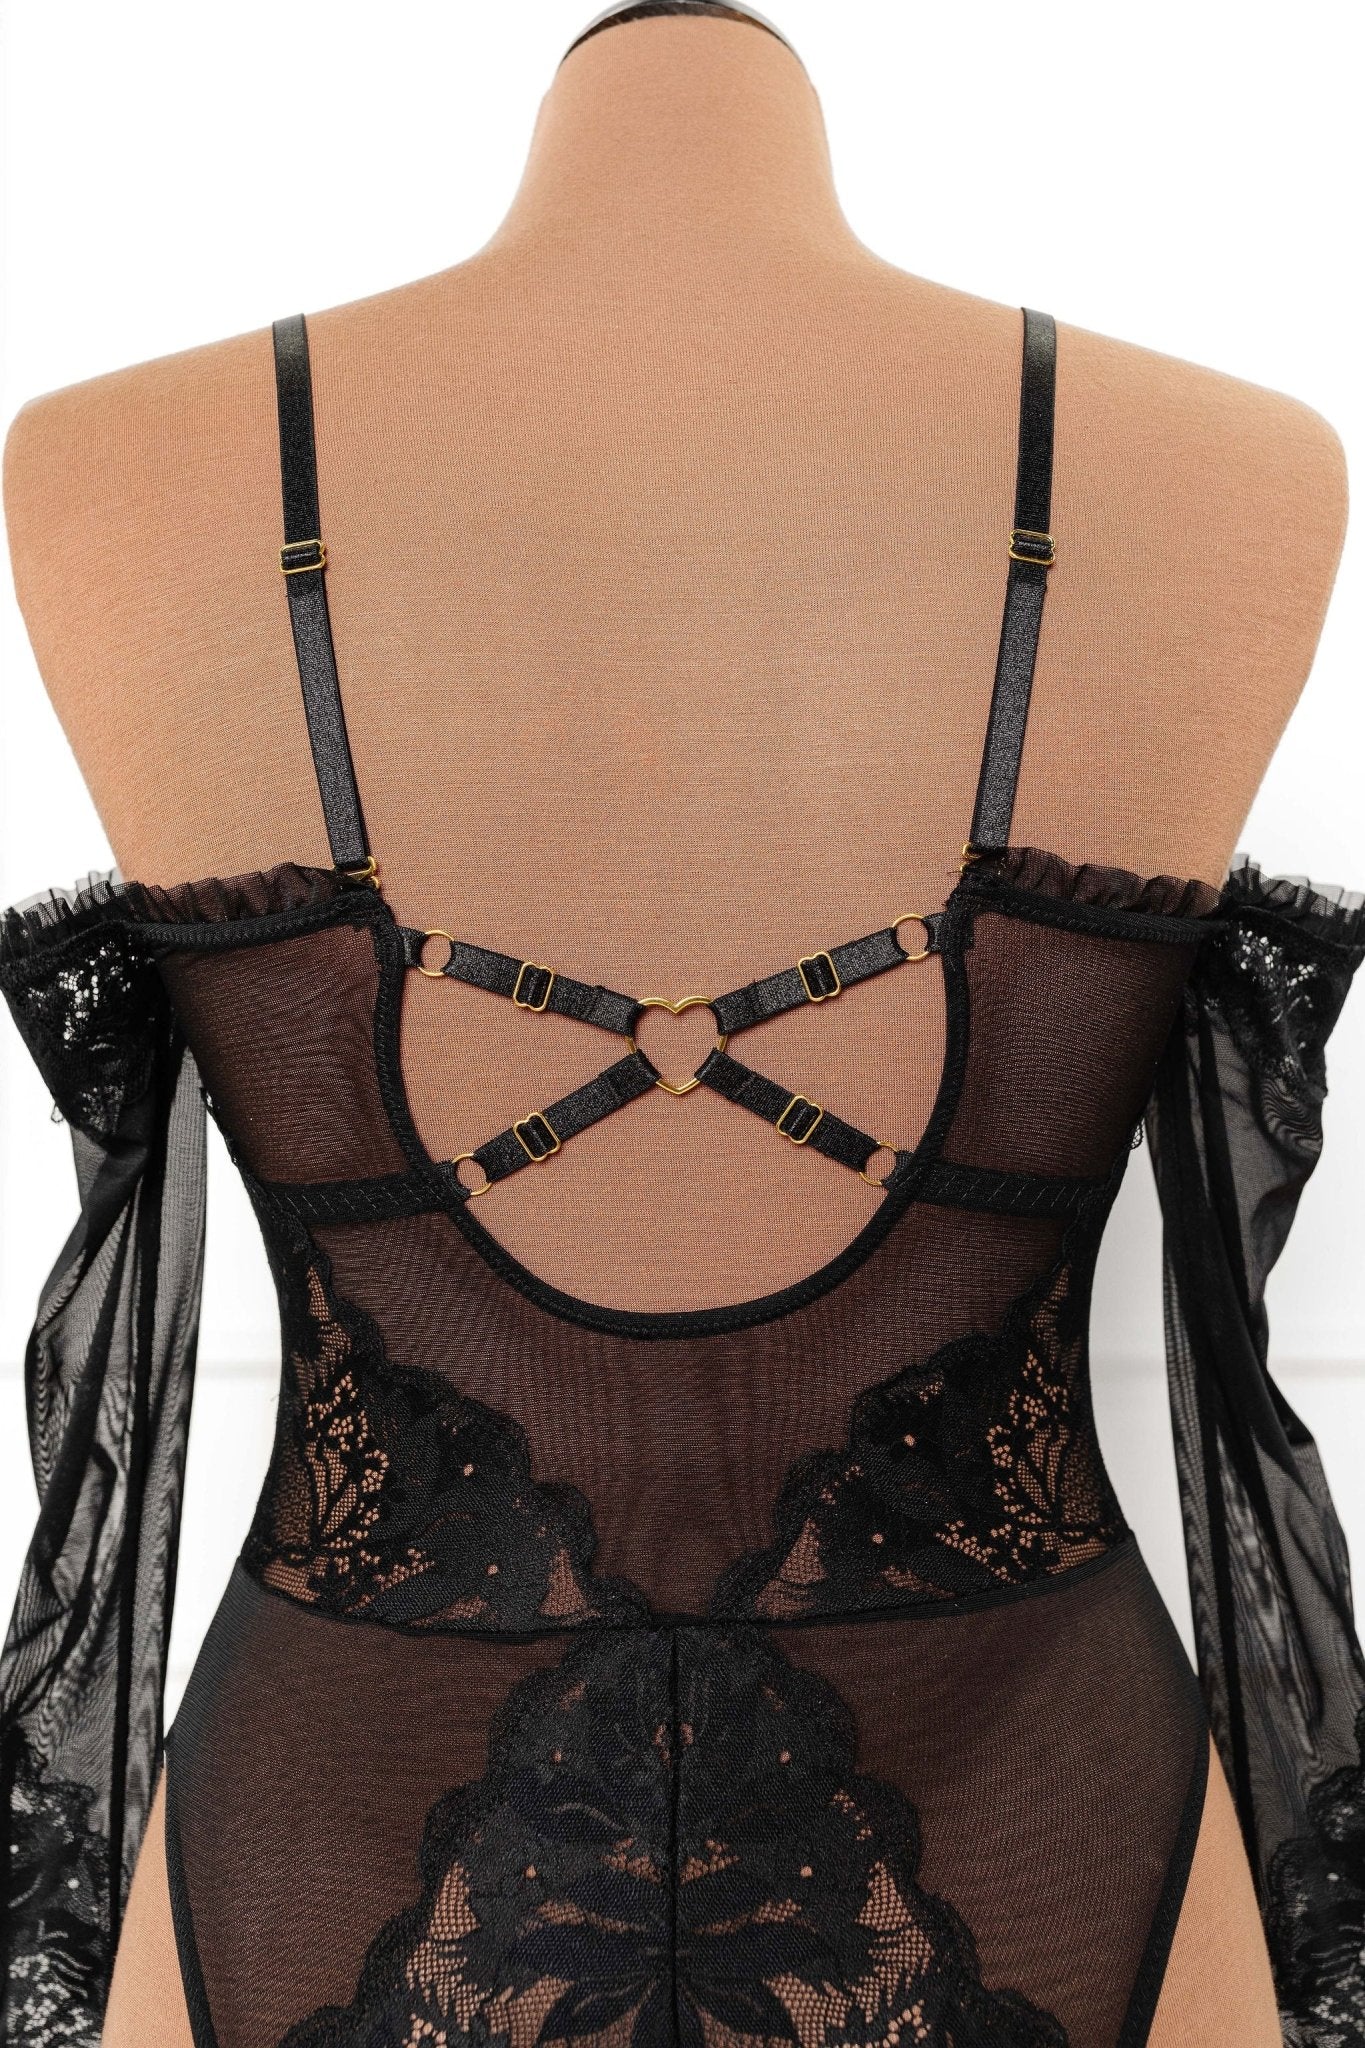 Lace & Mesh Off-The-Shoulder Crotchless Teddy - Black - Mentionables